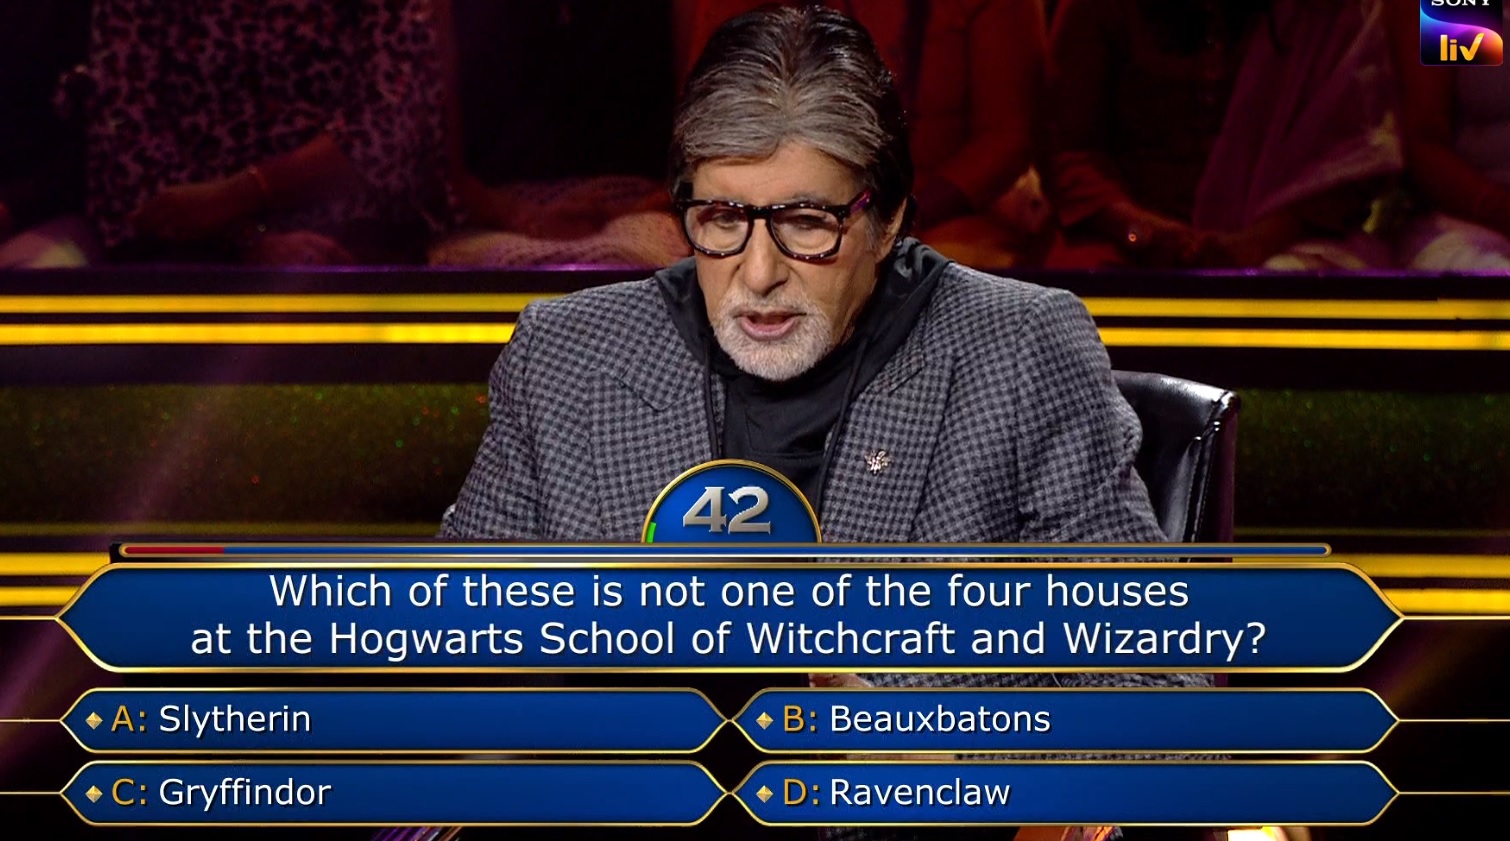 Ques : Which of these is not one of the four houses at the Hogwarts School of Witchcraft and Wizardry?